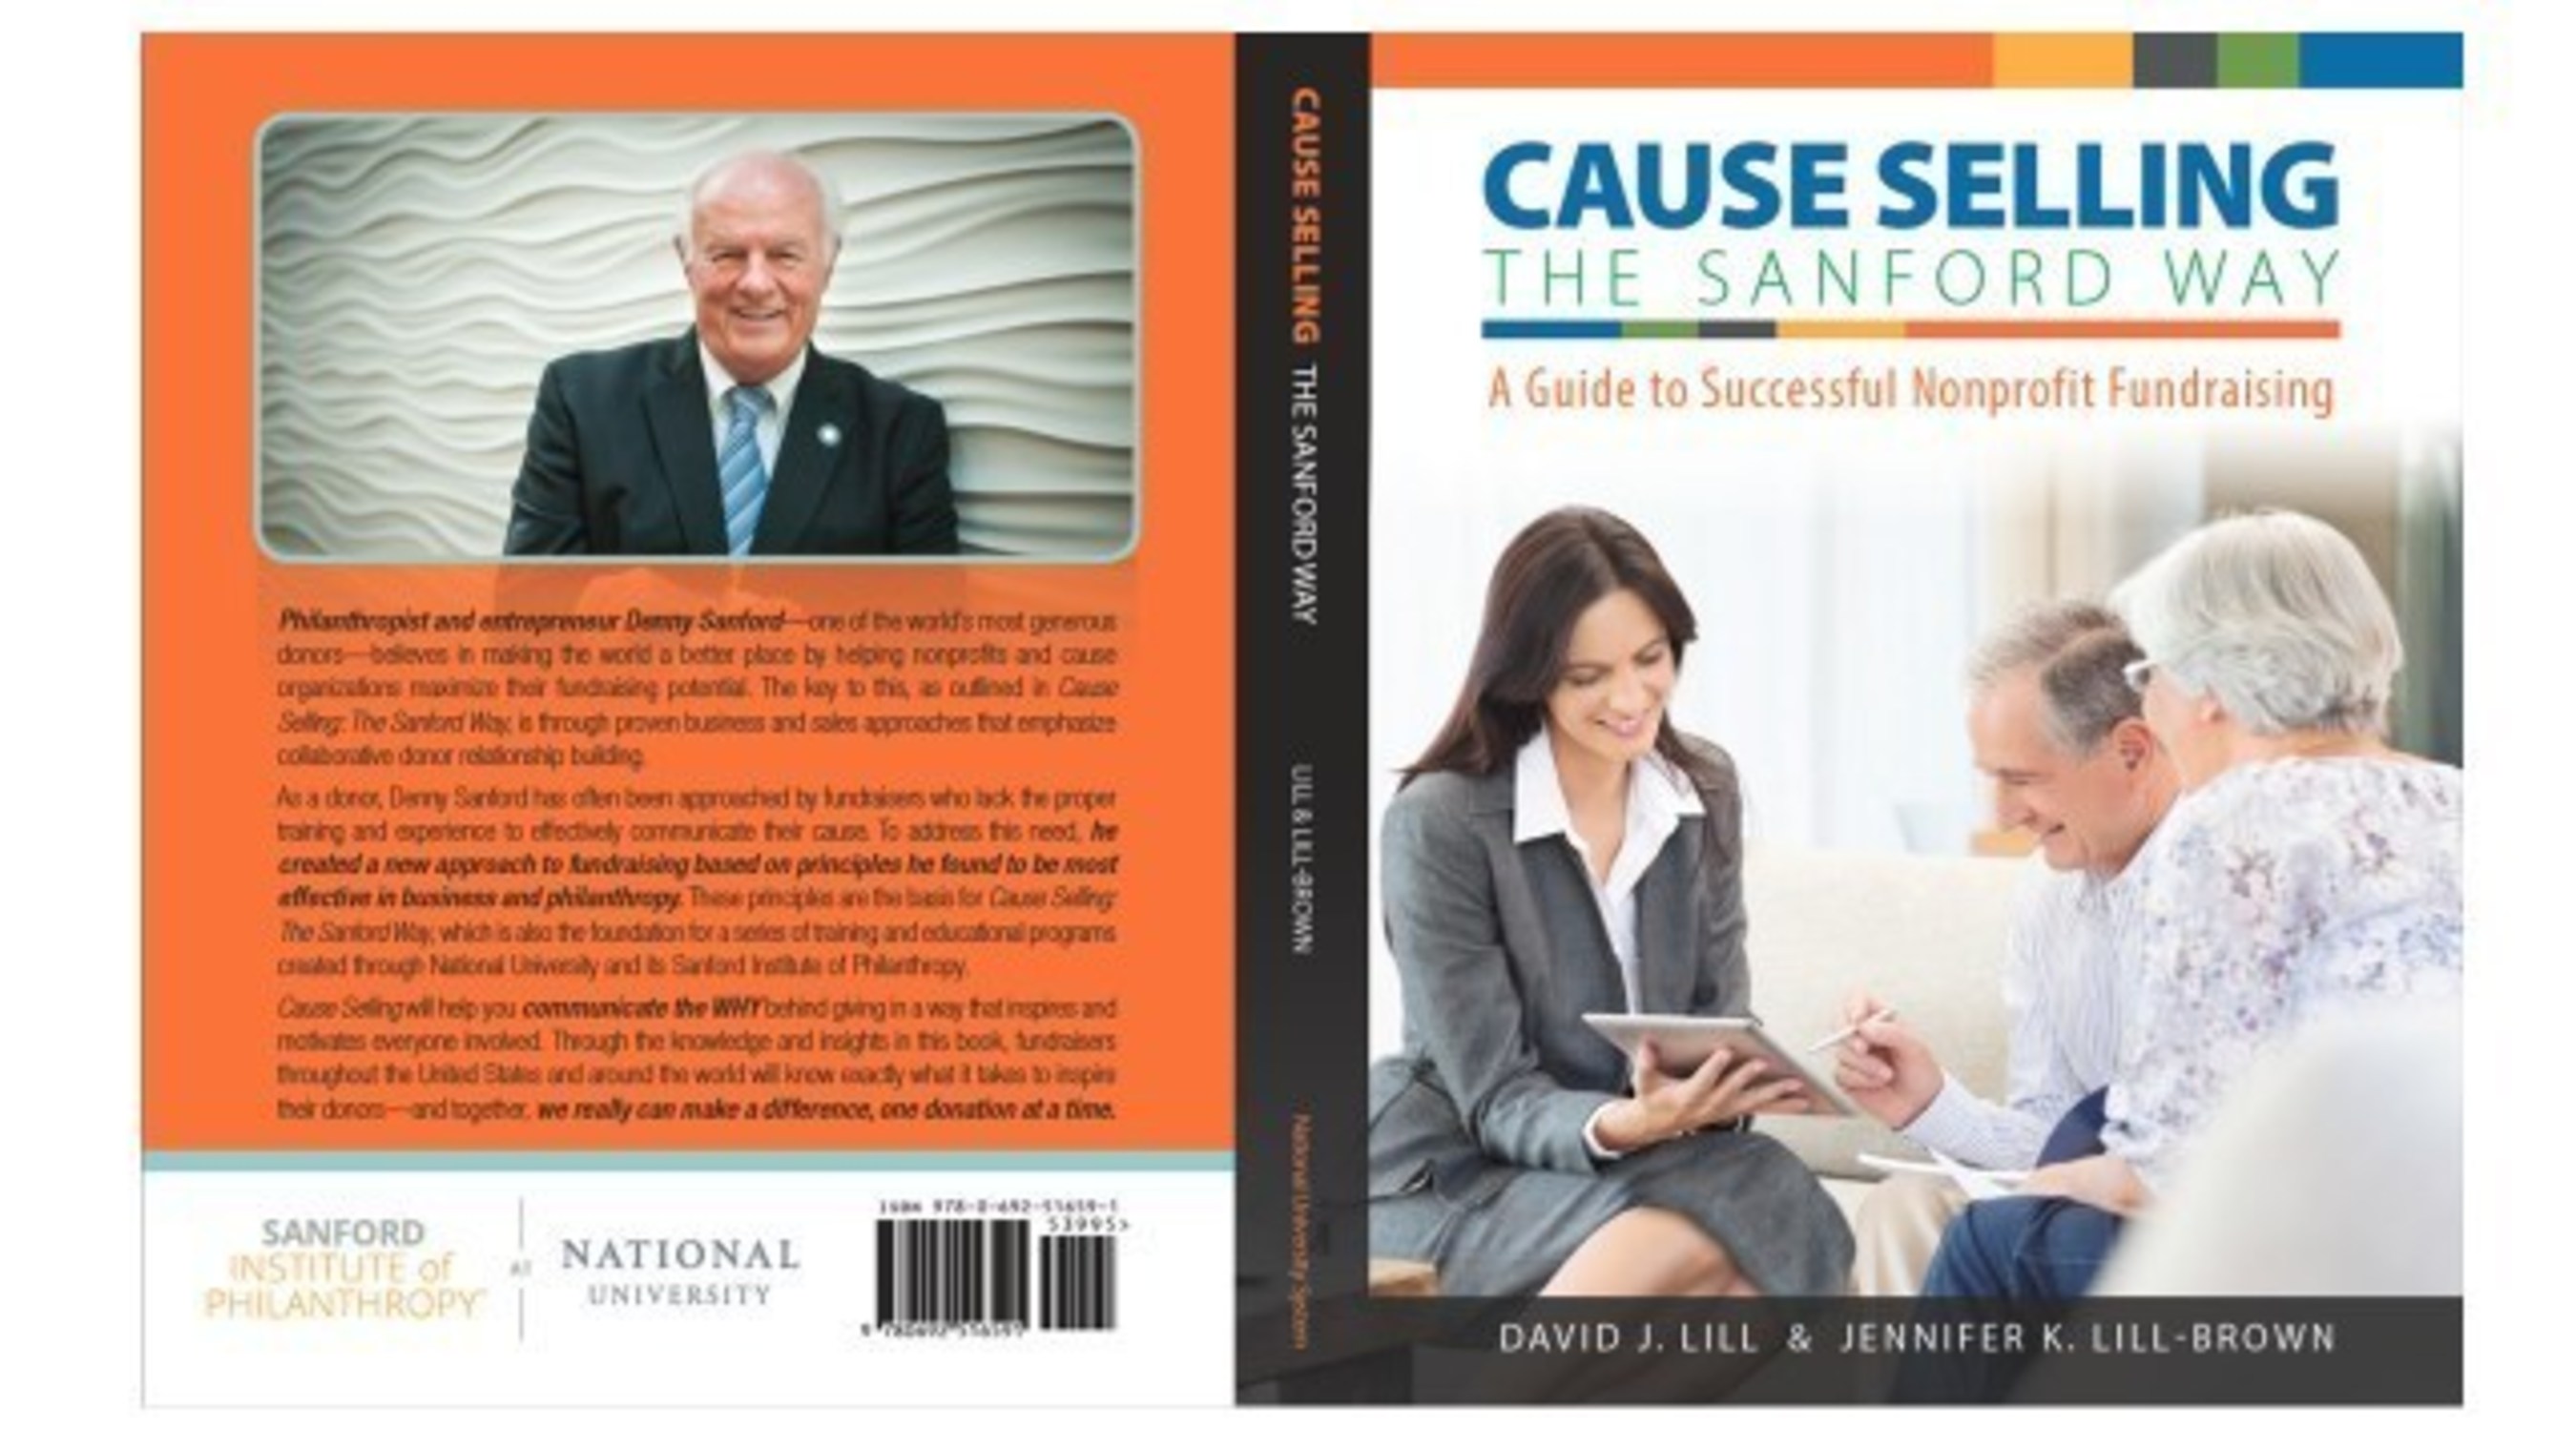 "Cause Selling The Sanford Way" is based on the vision of philanthropist T. Denny Sanford, and provides the foundation for programs offered through the Sanford Institute of Philanthropy at National University